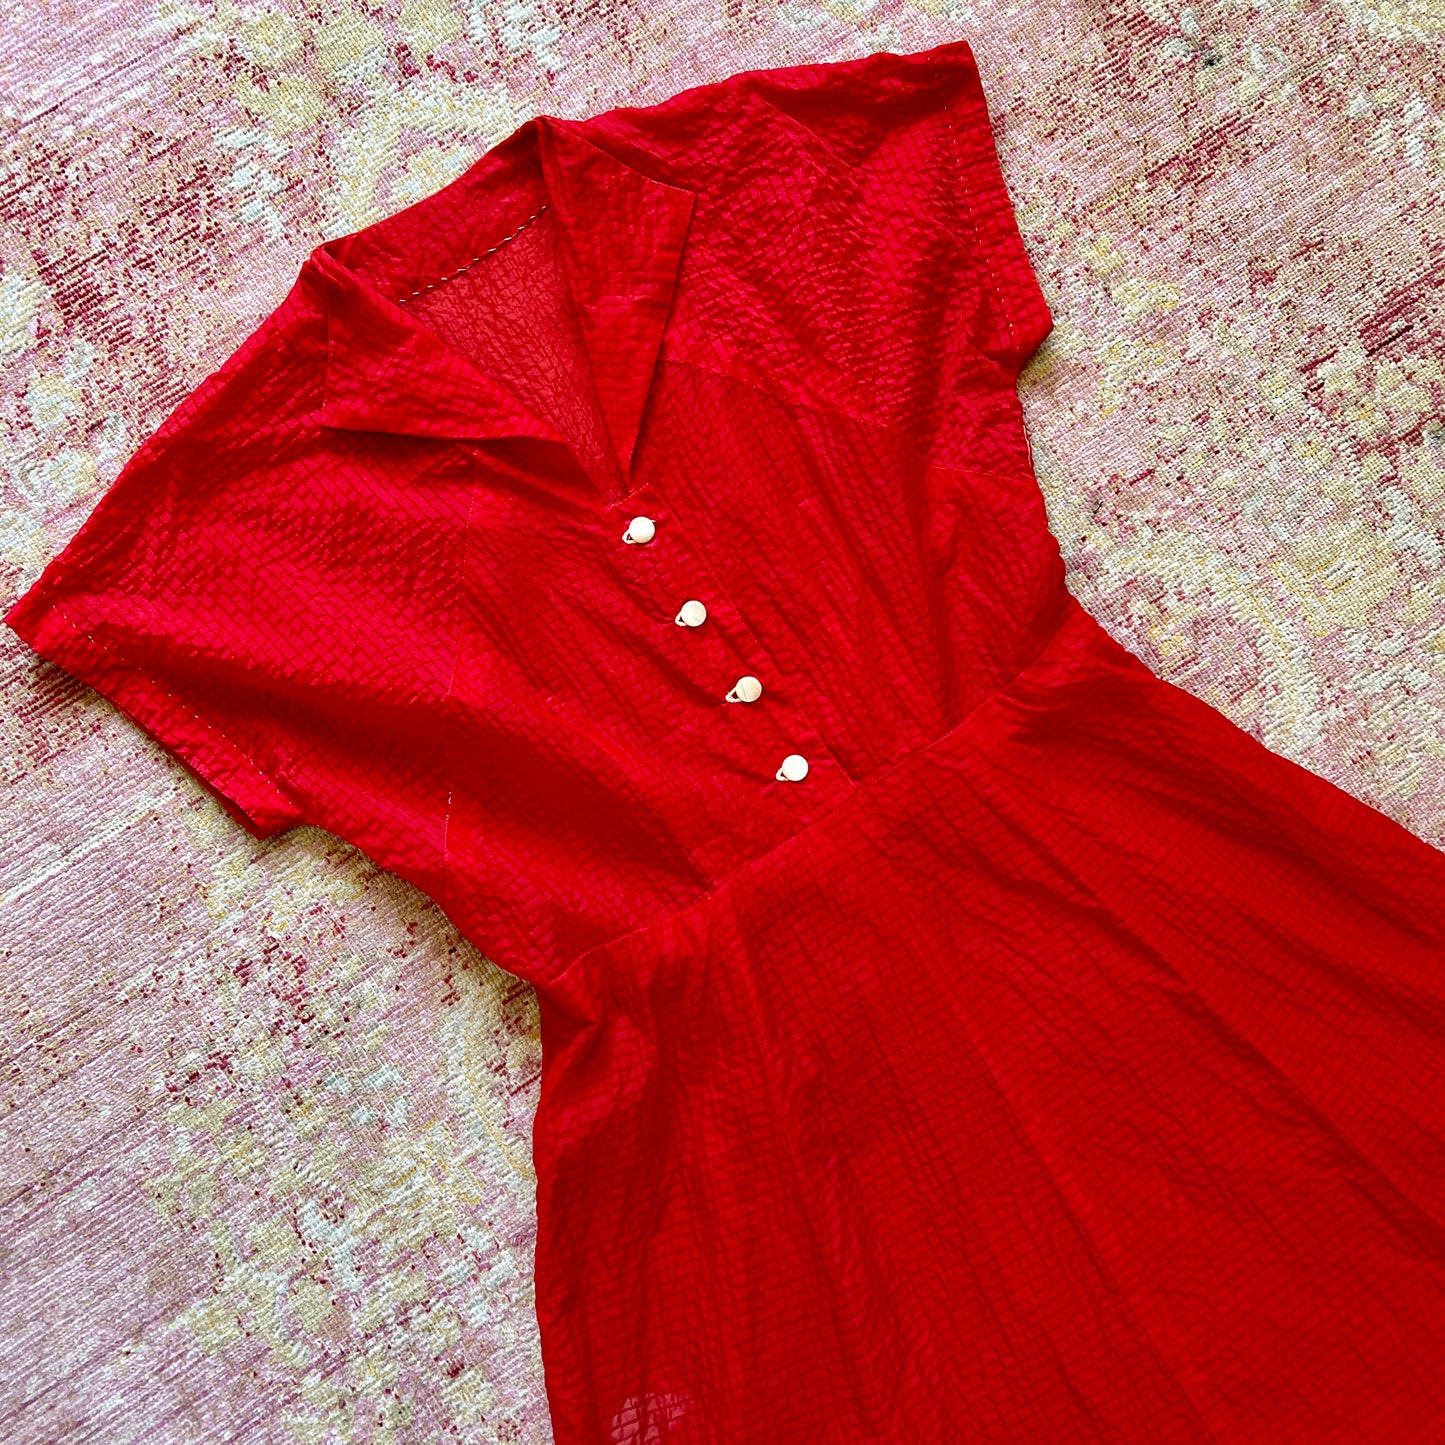 [AS-IS] 1940s Red Shirtwaist Dress | large